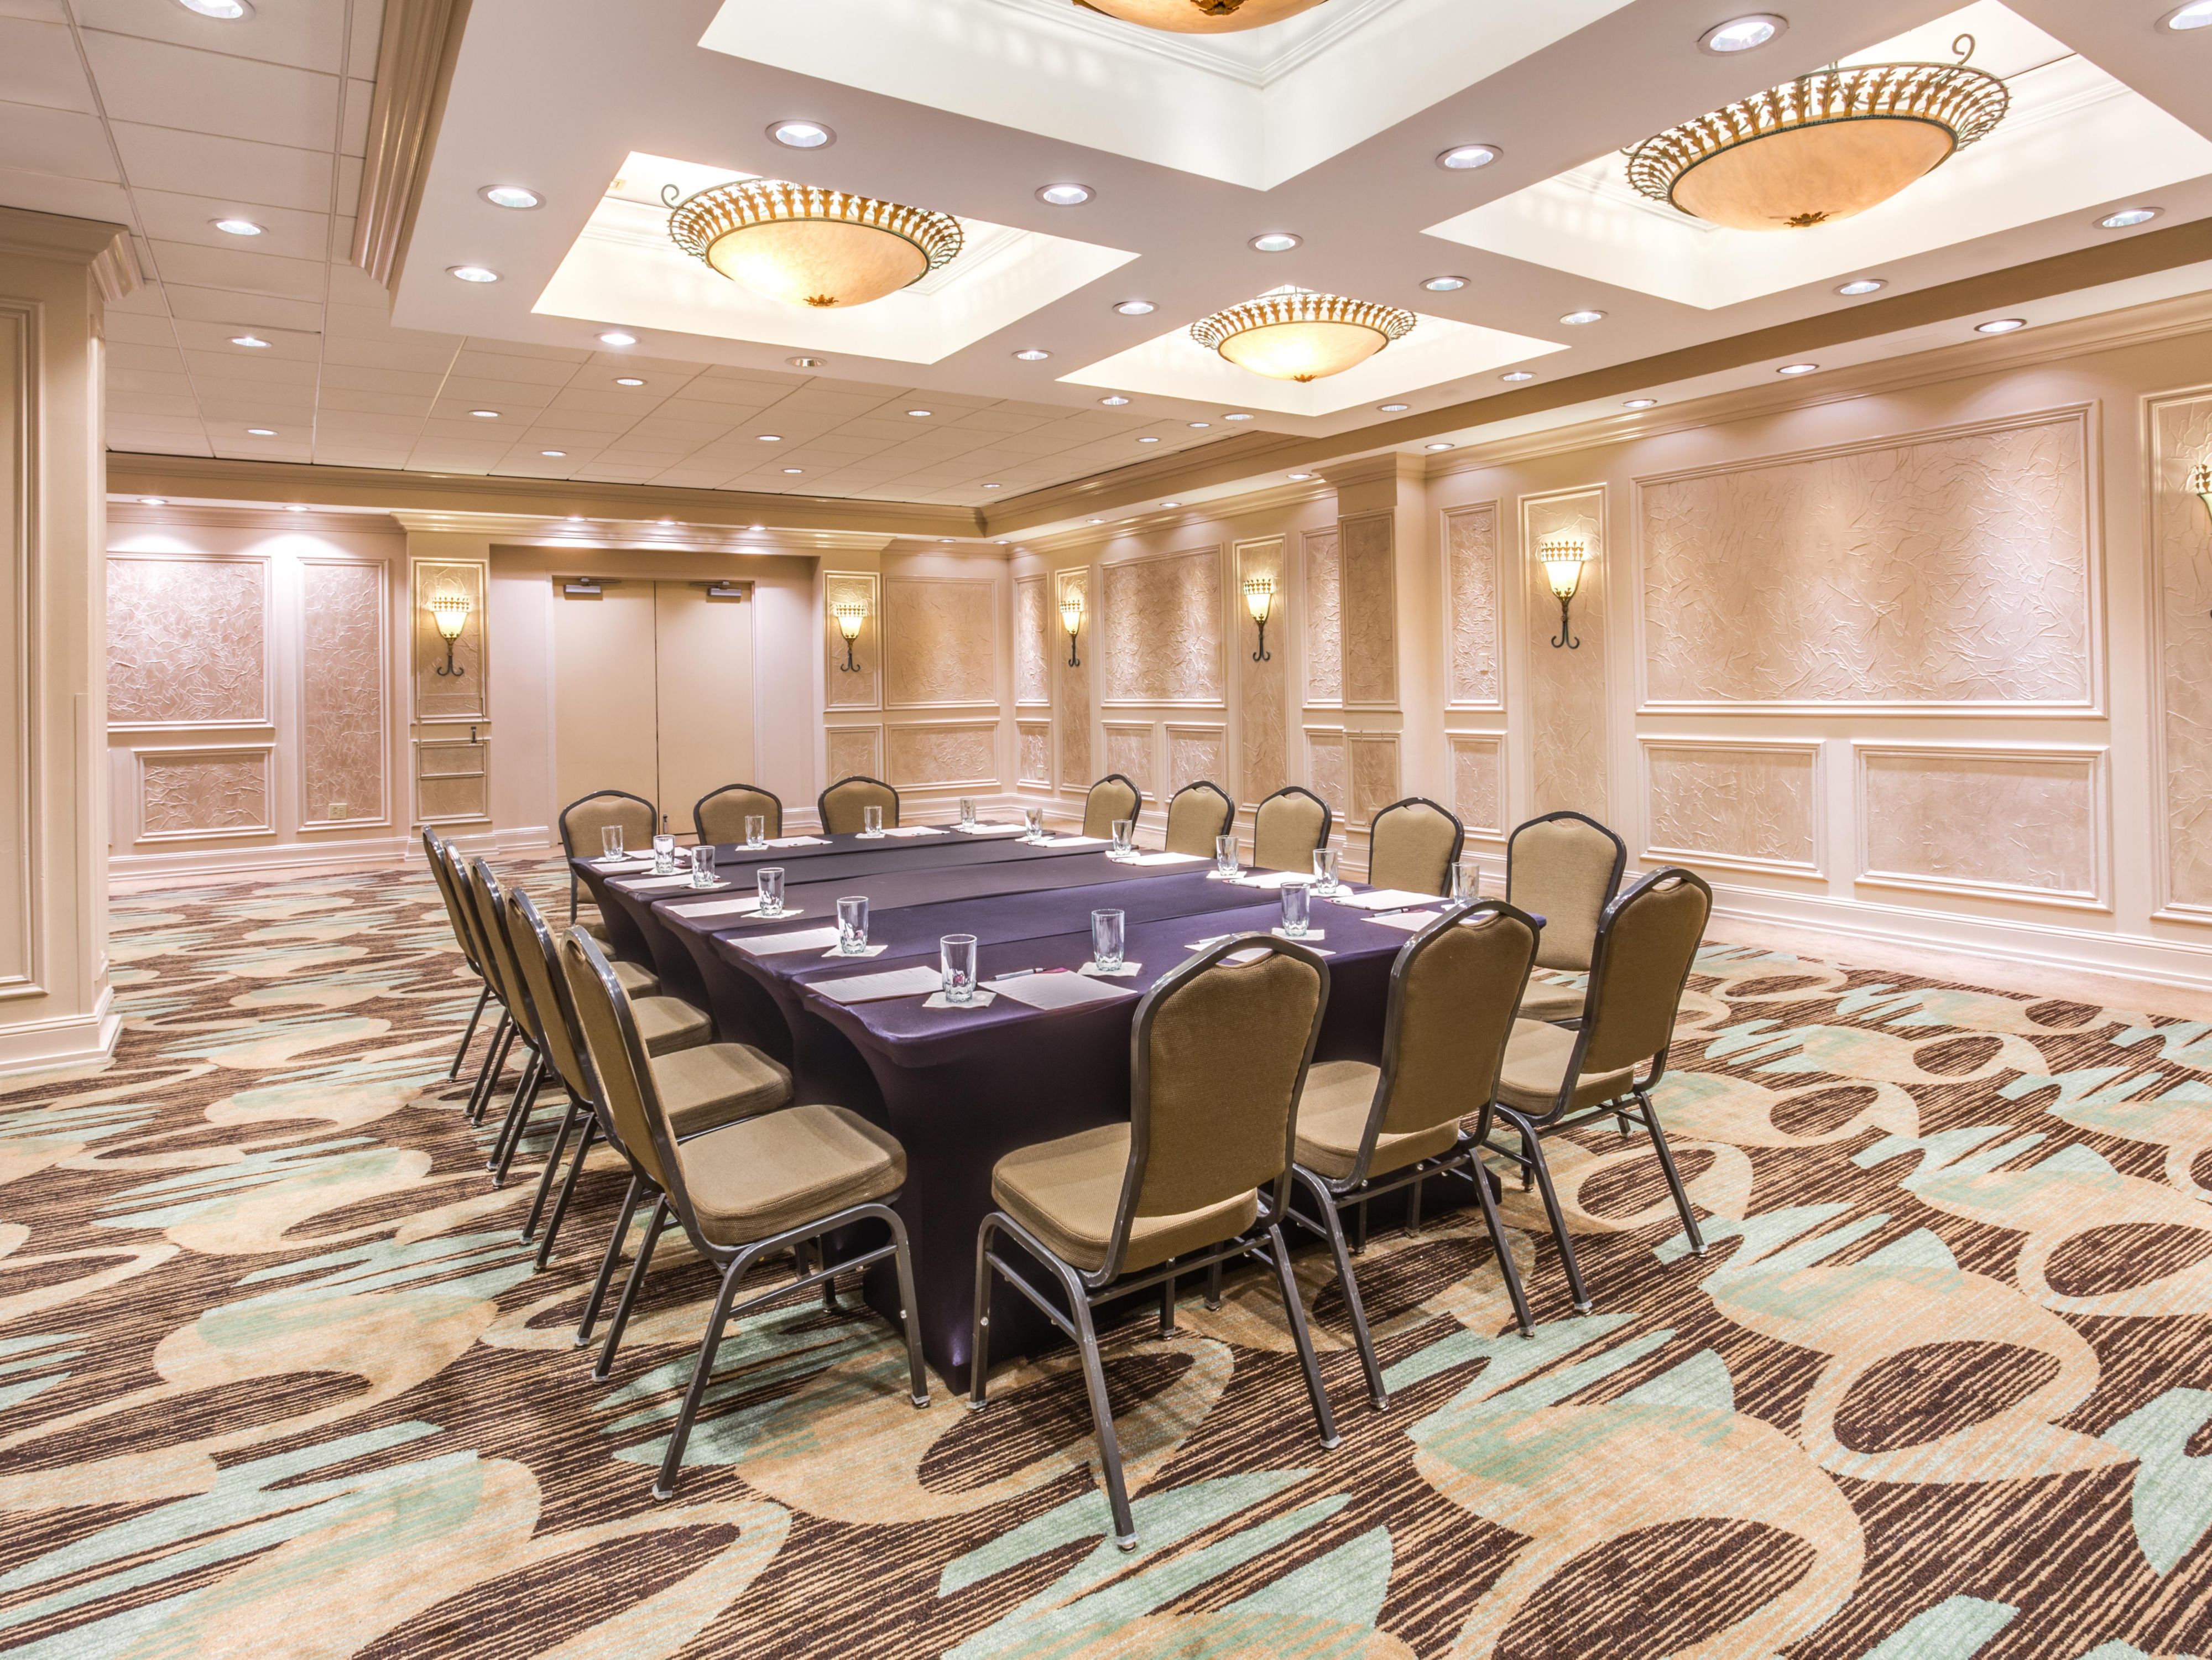 Whether you need one of our well-appointed conference rooms for a sales convention, board meeting or informal get-together with associates, your success is our passion. We understand all that goes into hosting and planning a meeting. A dedicated point of contact will work with you to ensure every detail goes smoothly, from start to finish.  